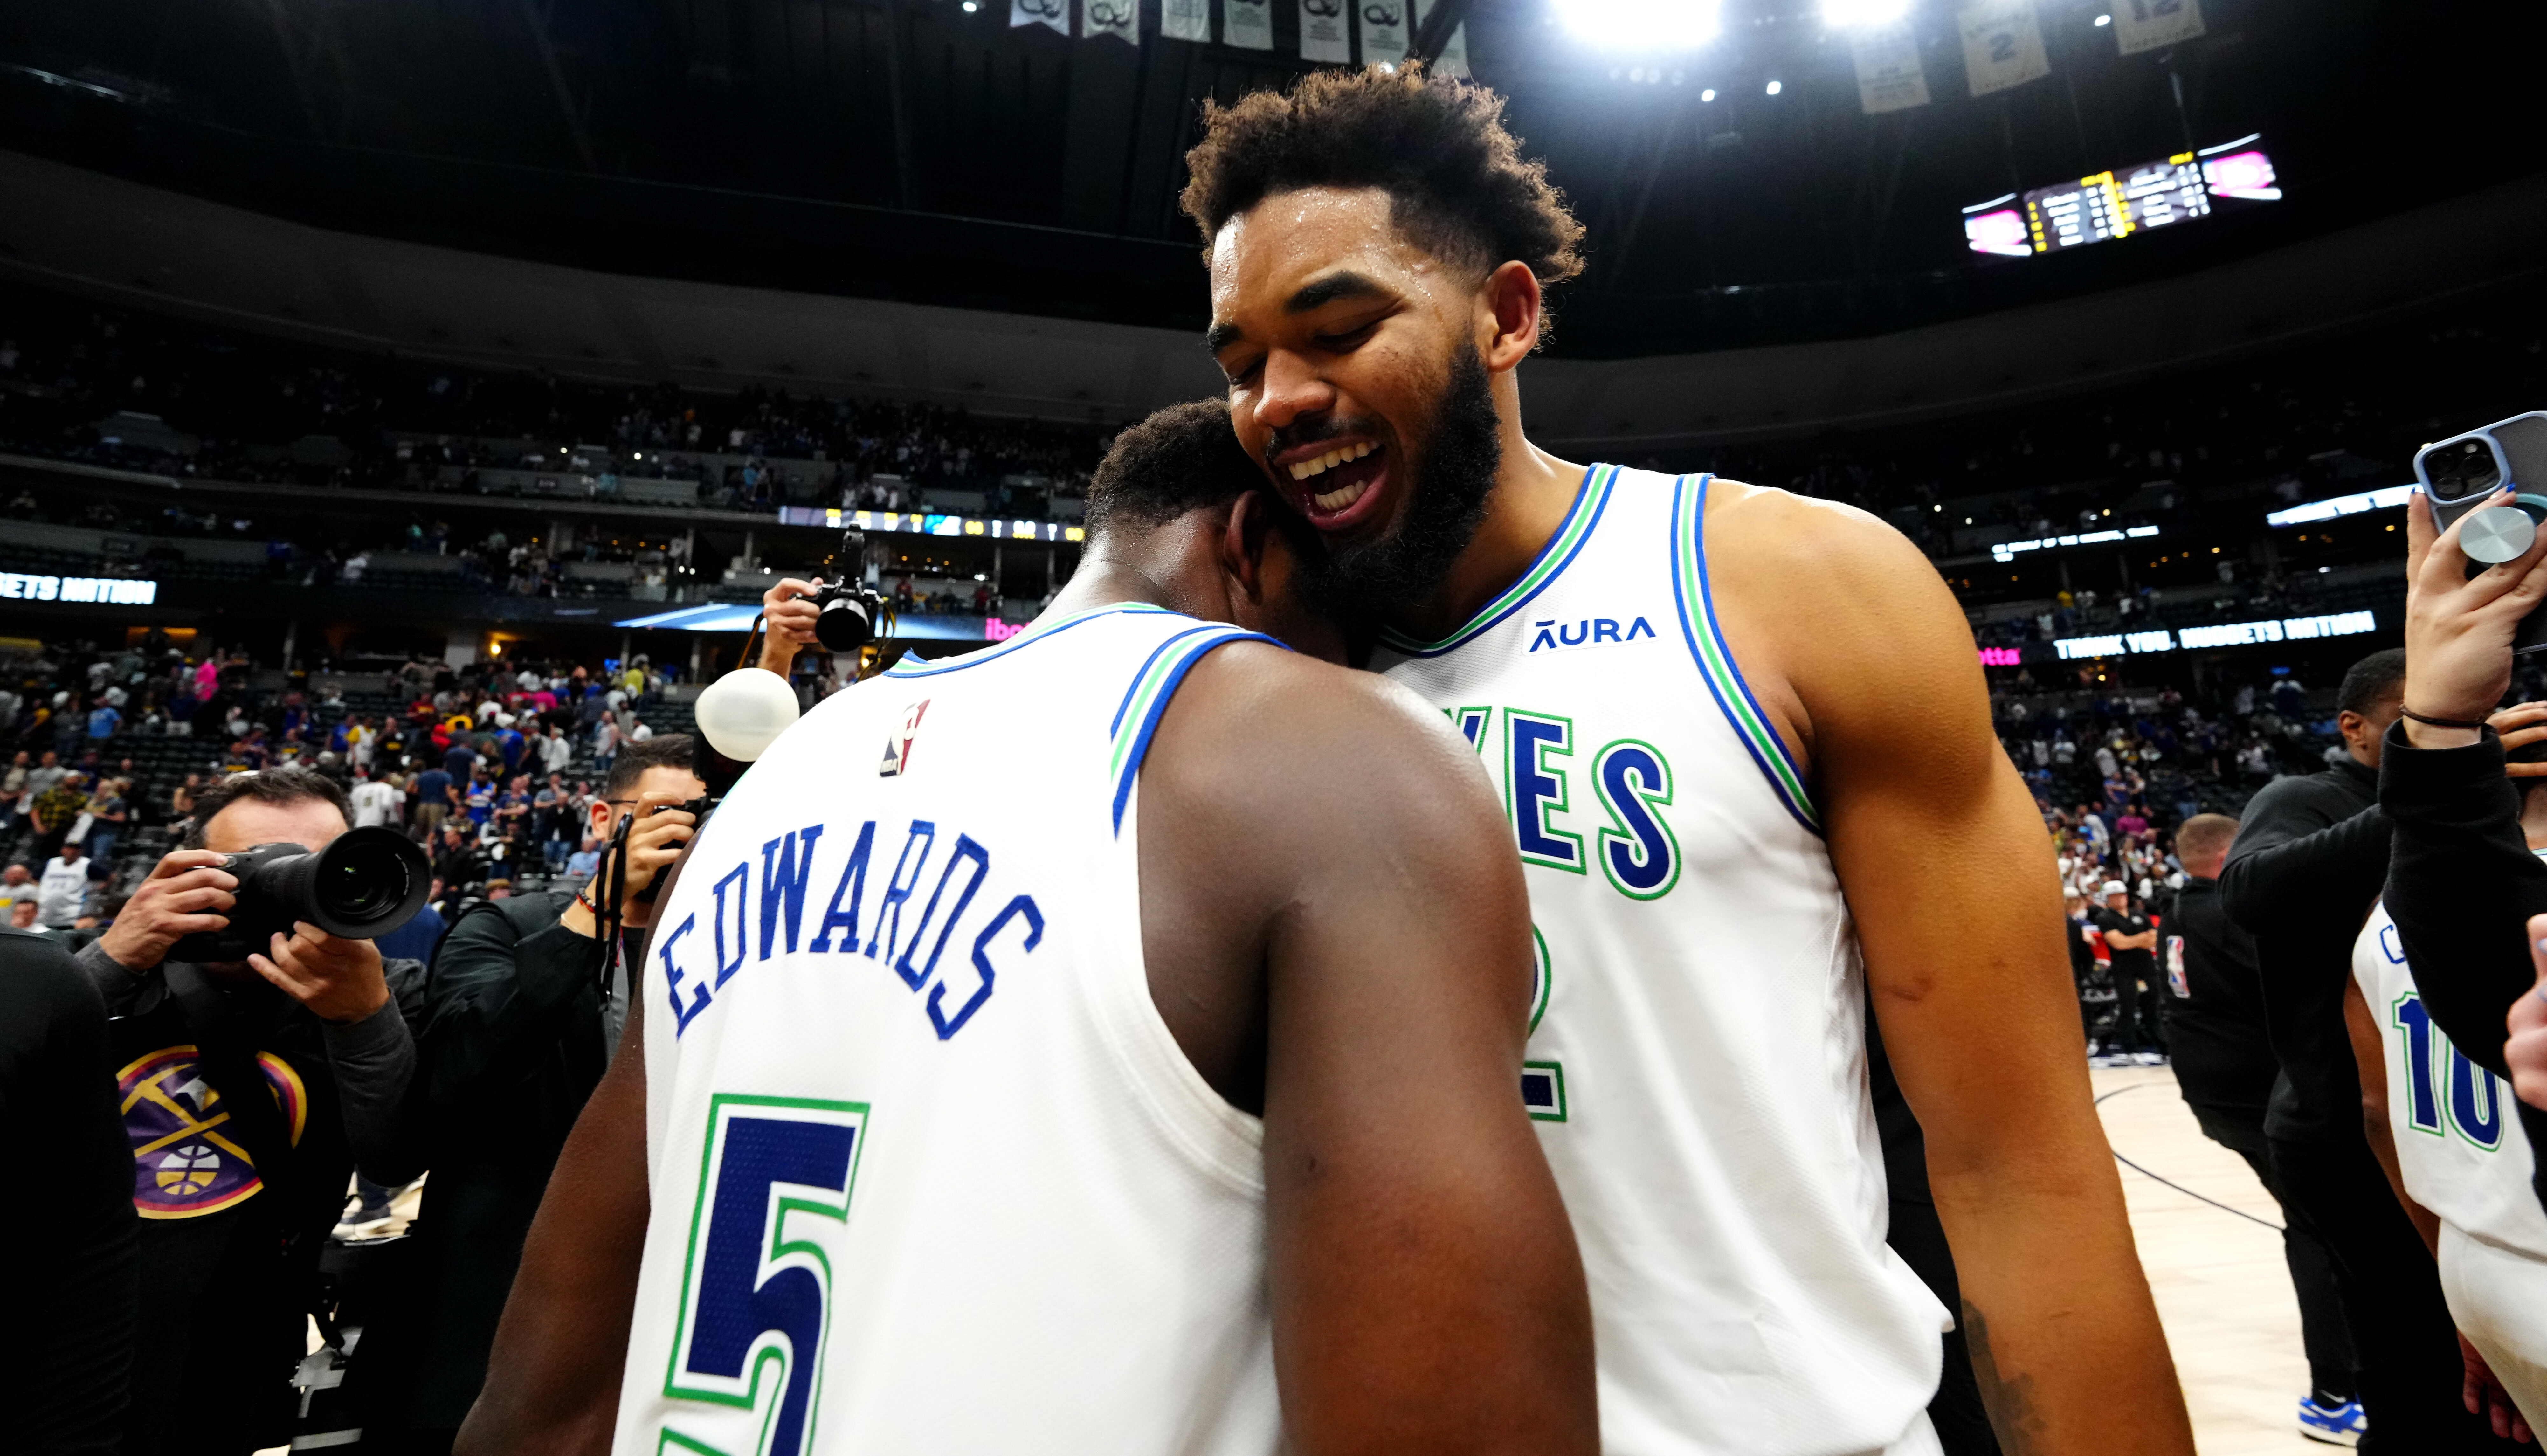 Ant Said it, but Karl-Anthony Towns Forced Charles Barkley to Bring His Ass to Minnesota